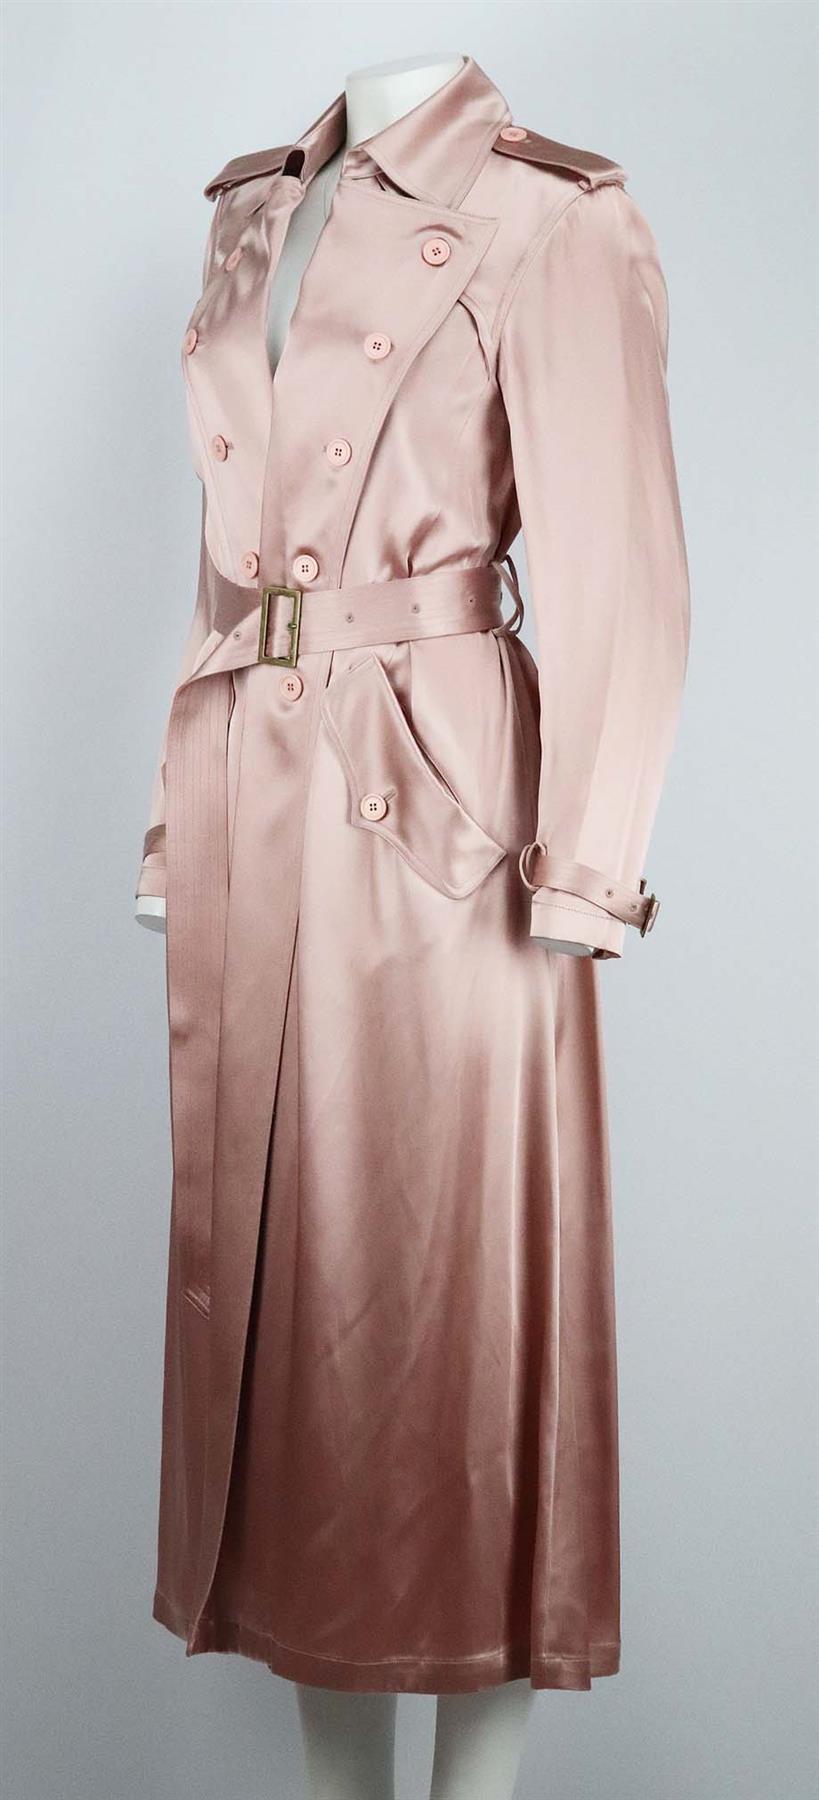 This trench coat by Fleur du Mal is made from lustrous pink satin that drapes beautifully and creates such an elevated vibe, it's designed in a slightly loose, double-breasted silhouette and has traditional shoulder epaulettes and buckle-fastening